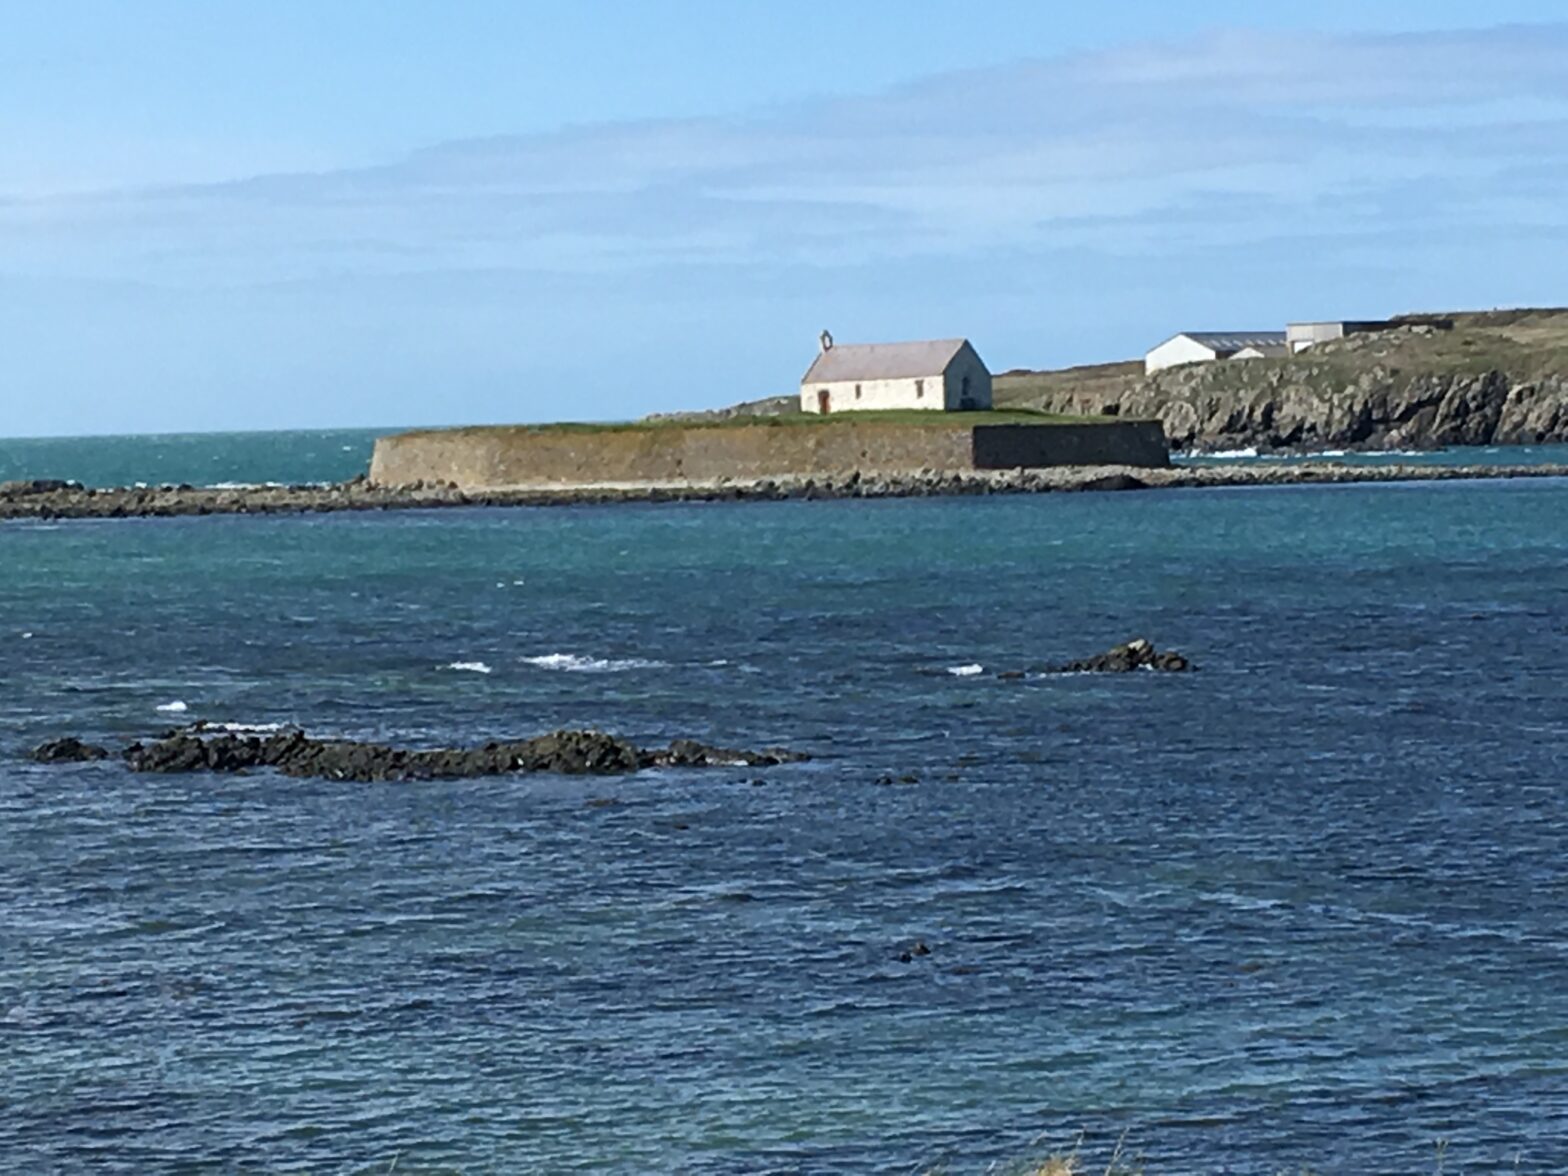 St Cwyfan's, the 'church in the sea' is marooned at high tide, off Anglesey.